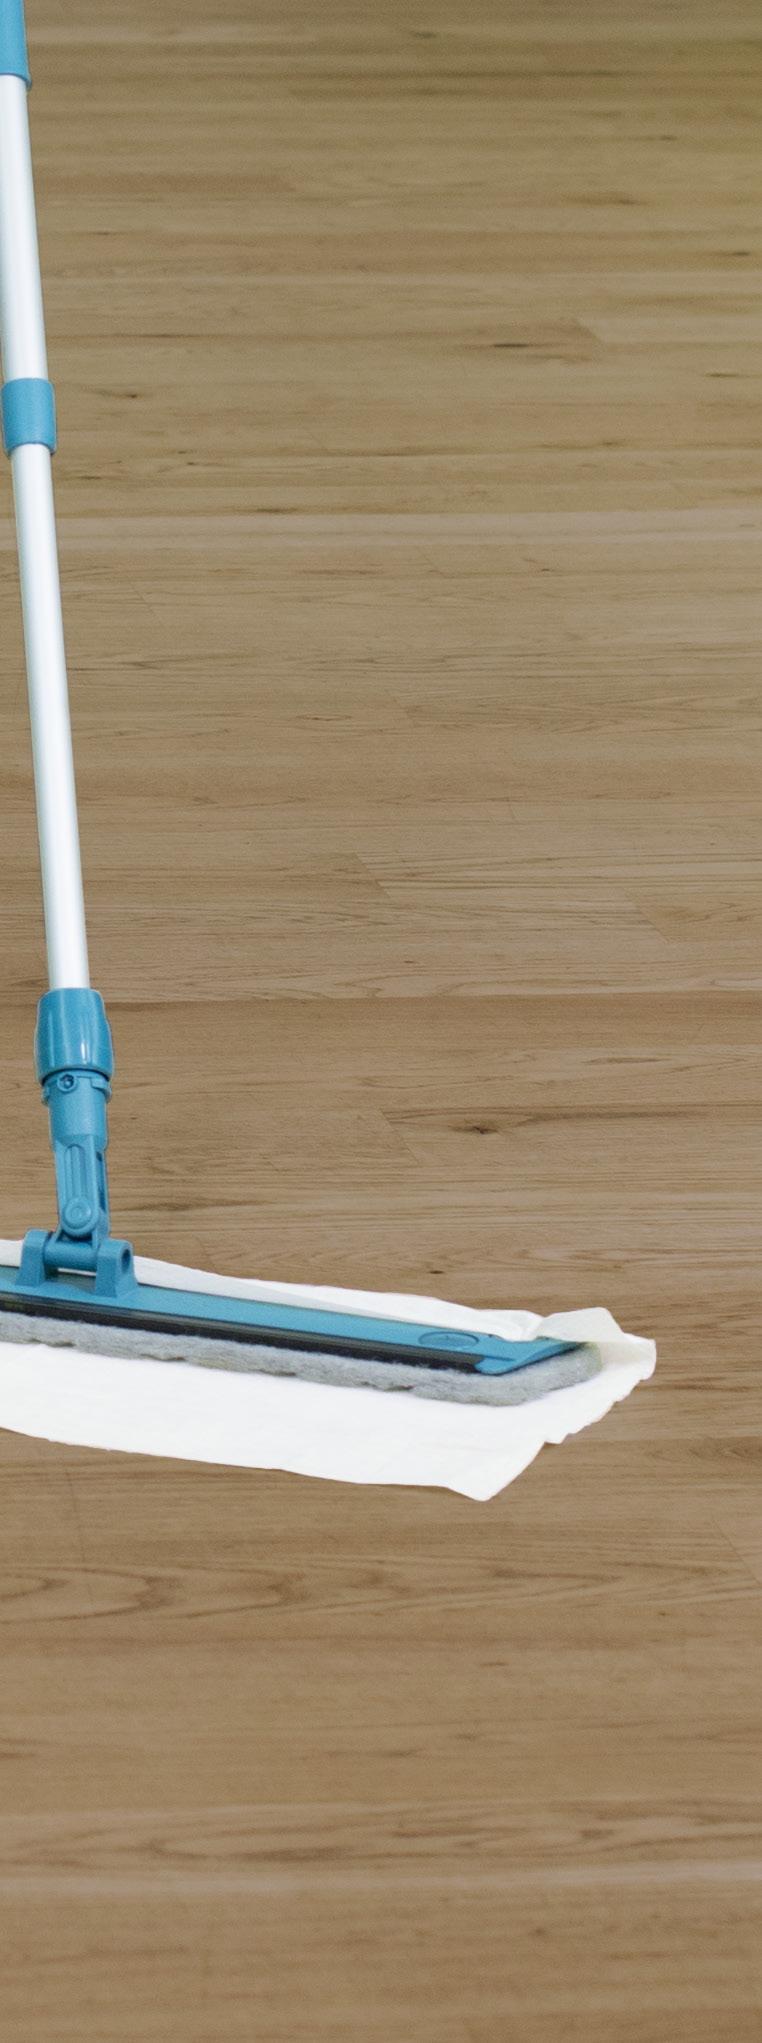 Improved safety Dust-binding mopping with the Masslinn leaves floors dry and less likely to cause accidents. There is no danger of personnel or passers-by slipping and falling.